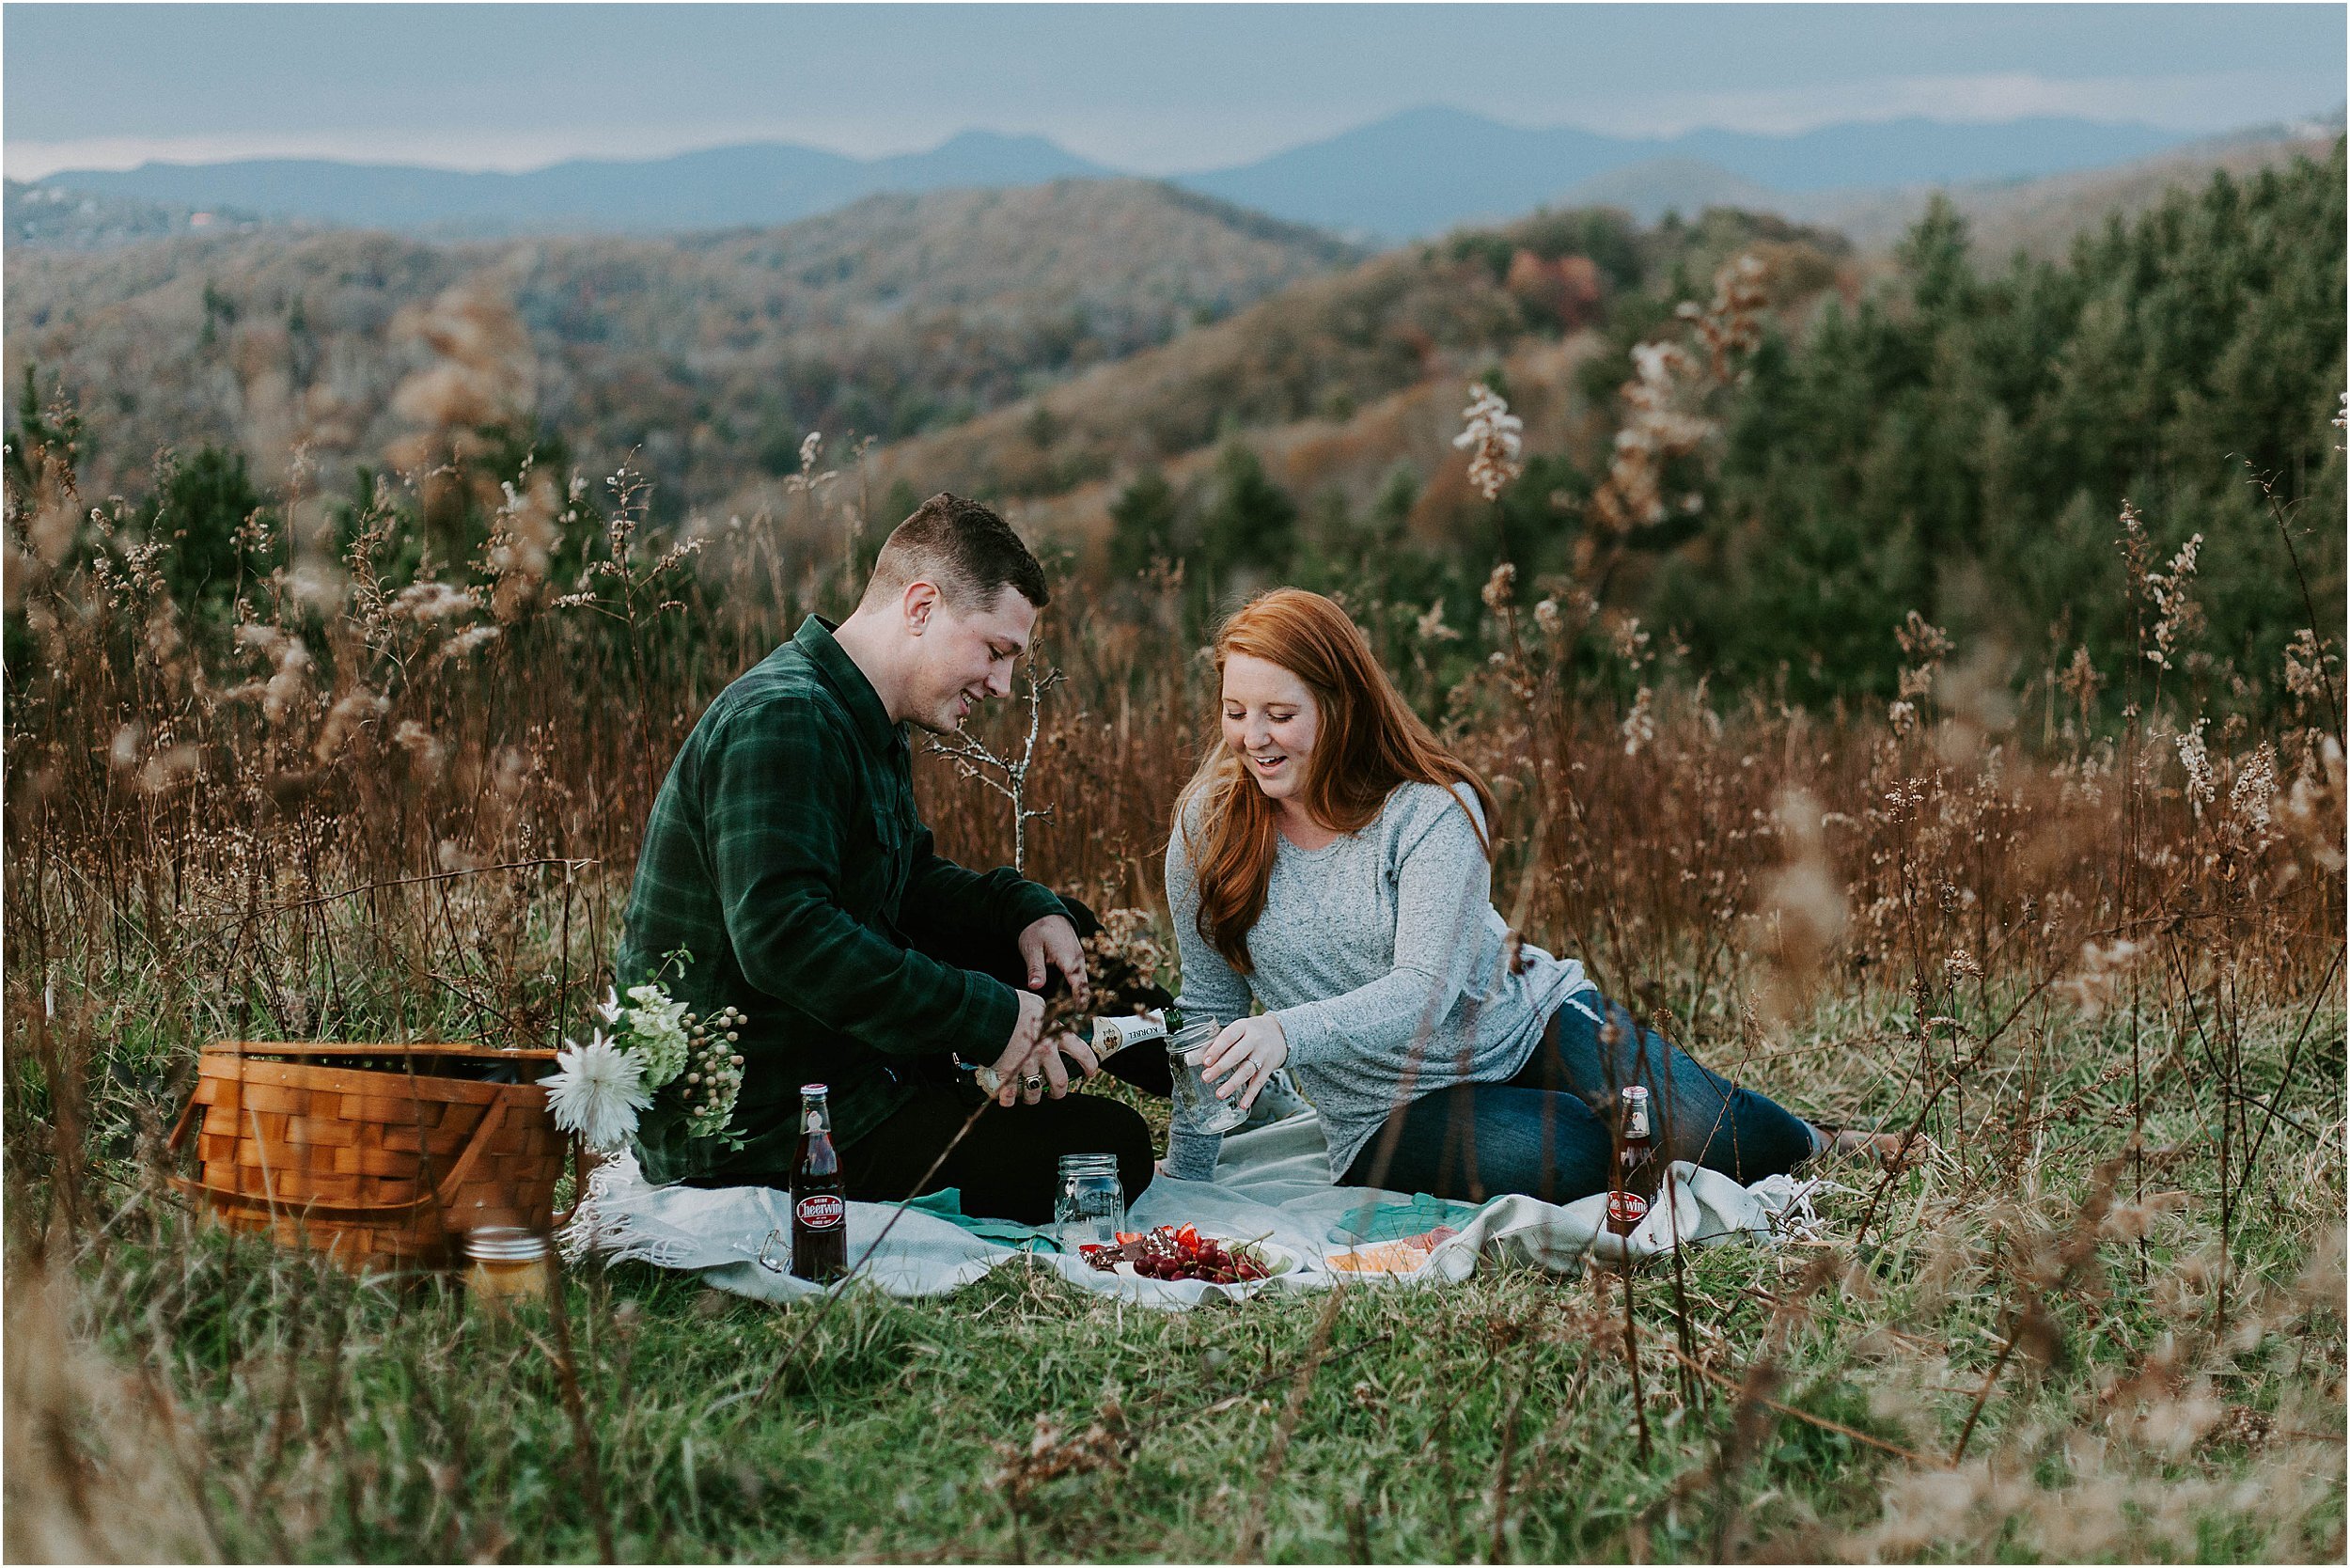  A couple is having a picnic on a blanket in the grass with mountains in the distance. 